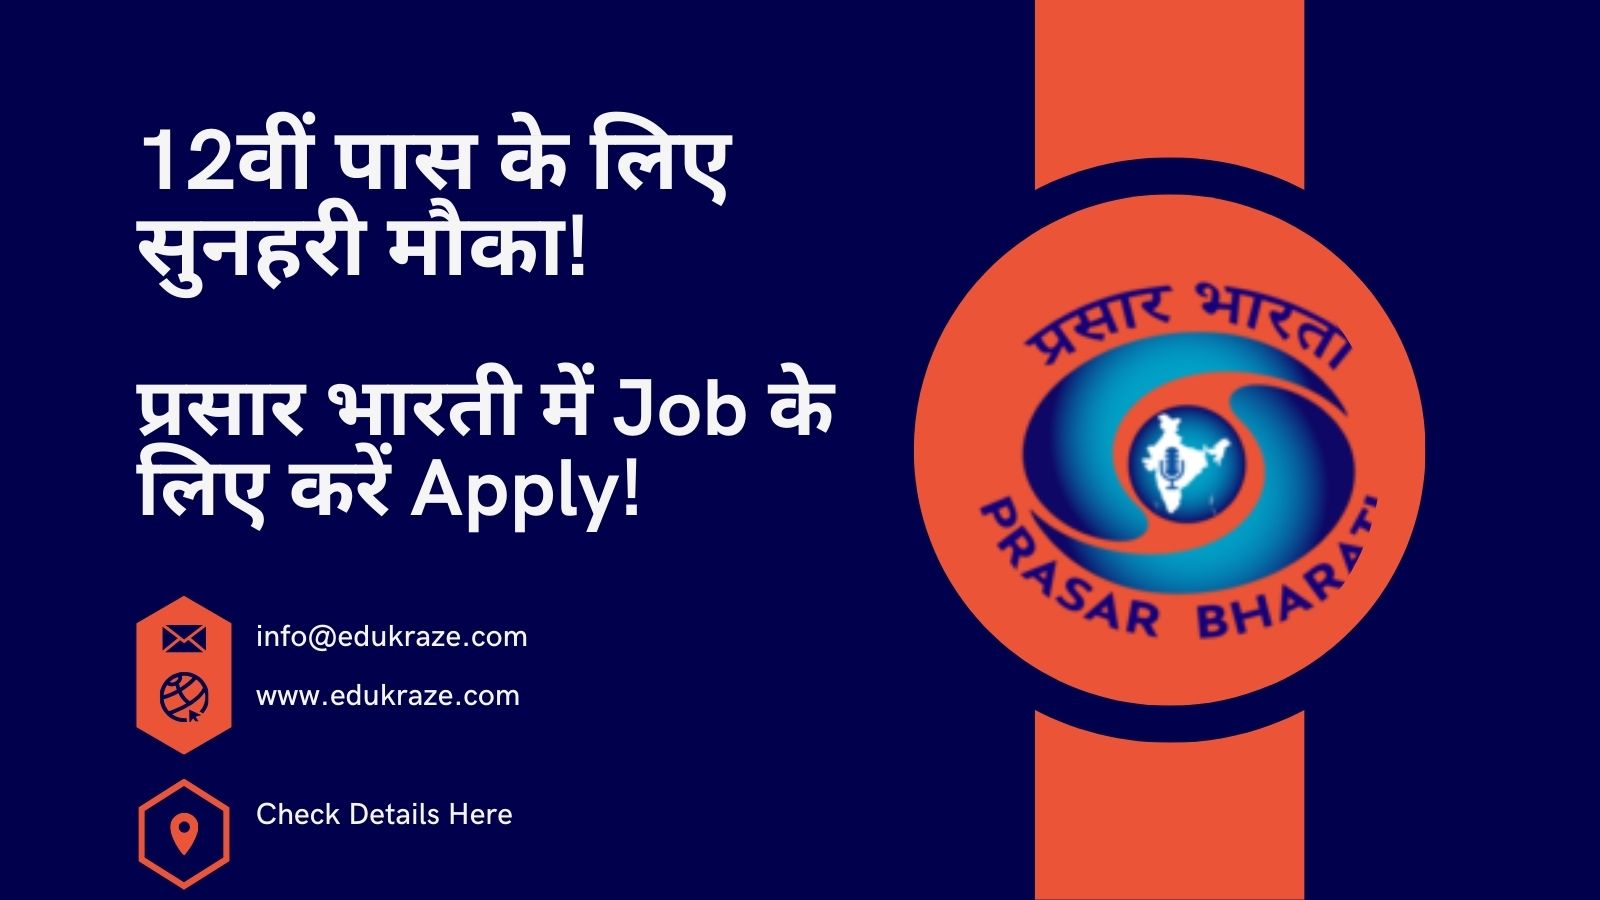 Prasar Bharati Recruitment Announced | 12th Pass Candidates Eligible to Apply